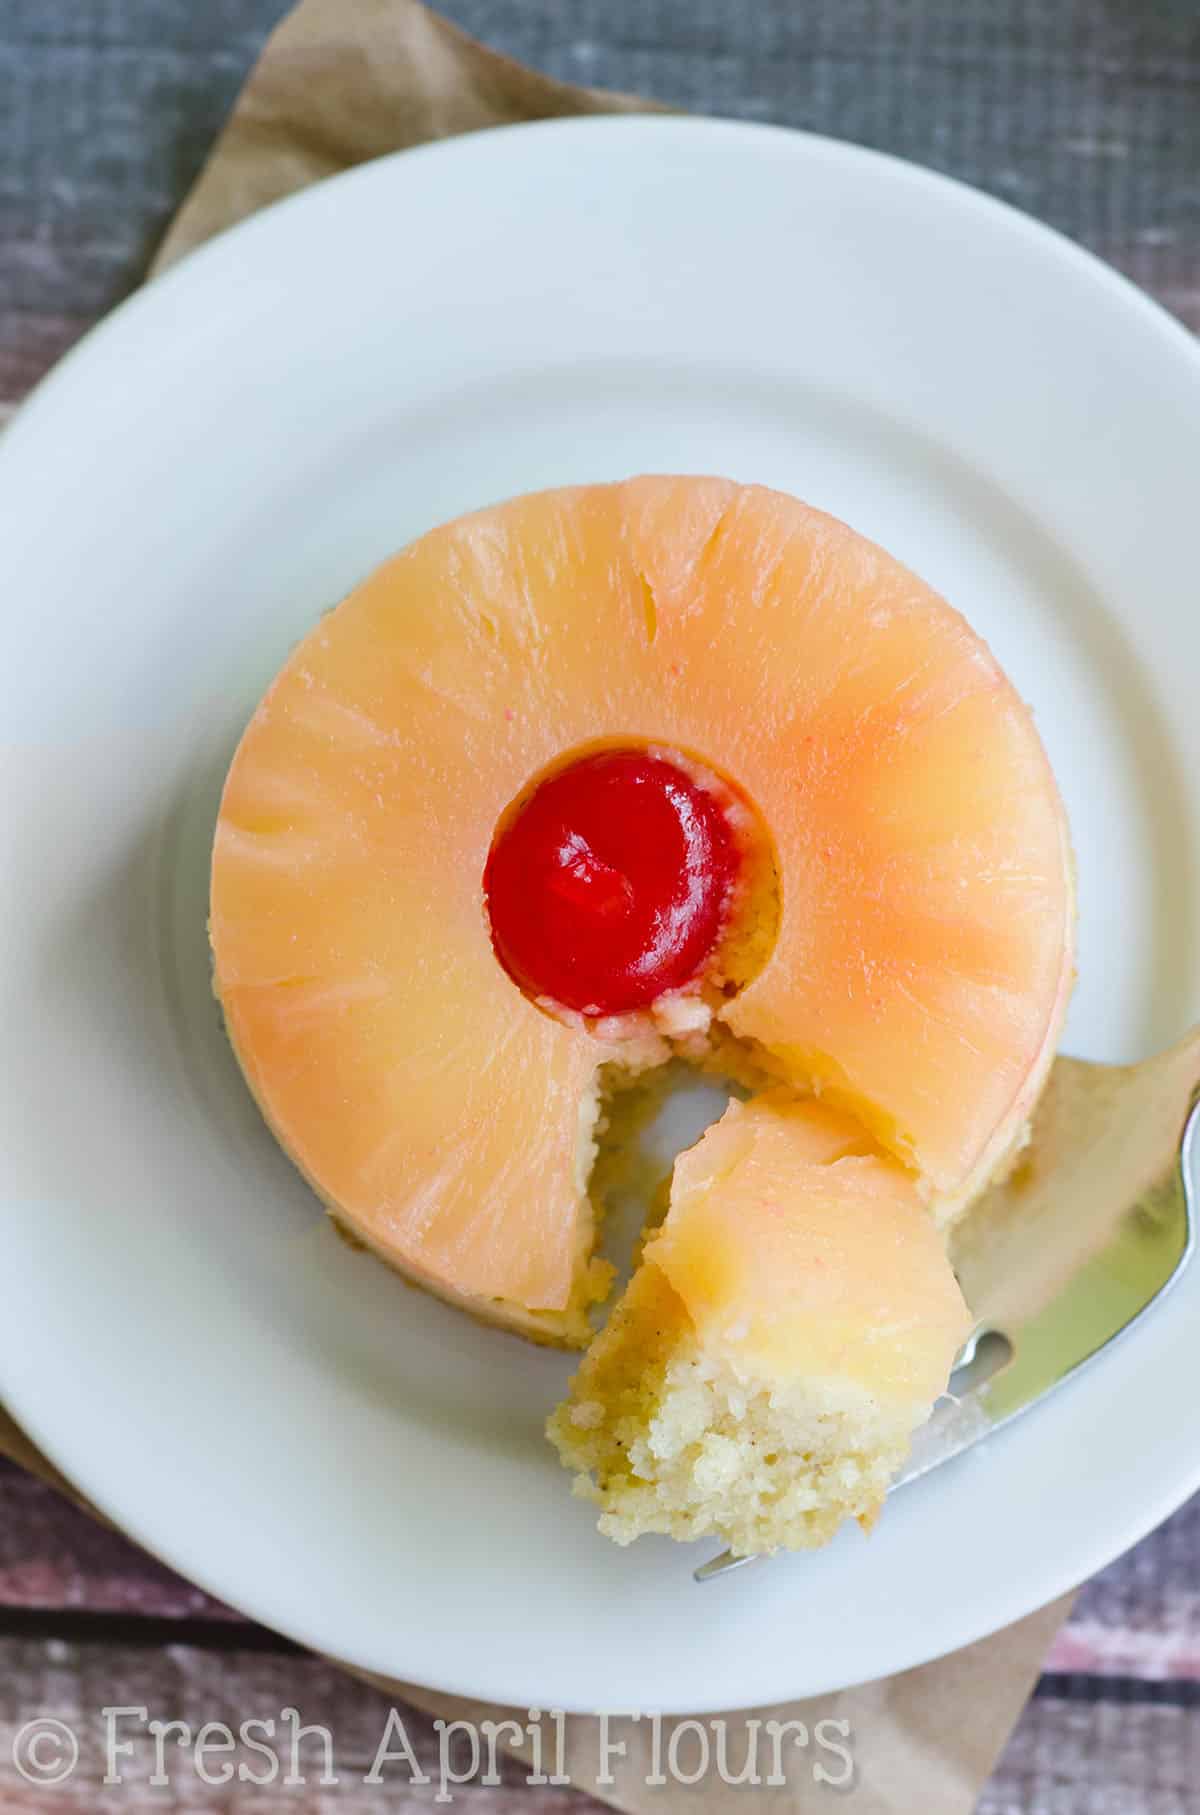 Aerial photo of a mini pineapple upside down cake on a plate with a forkful taken out of it.